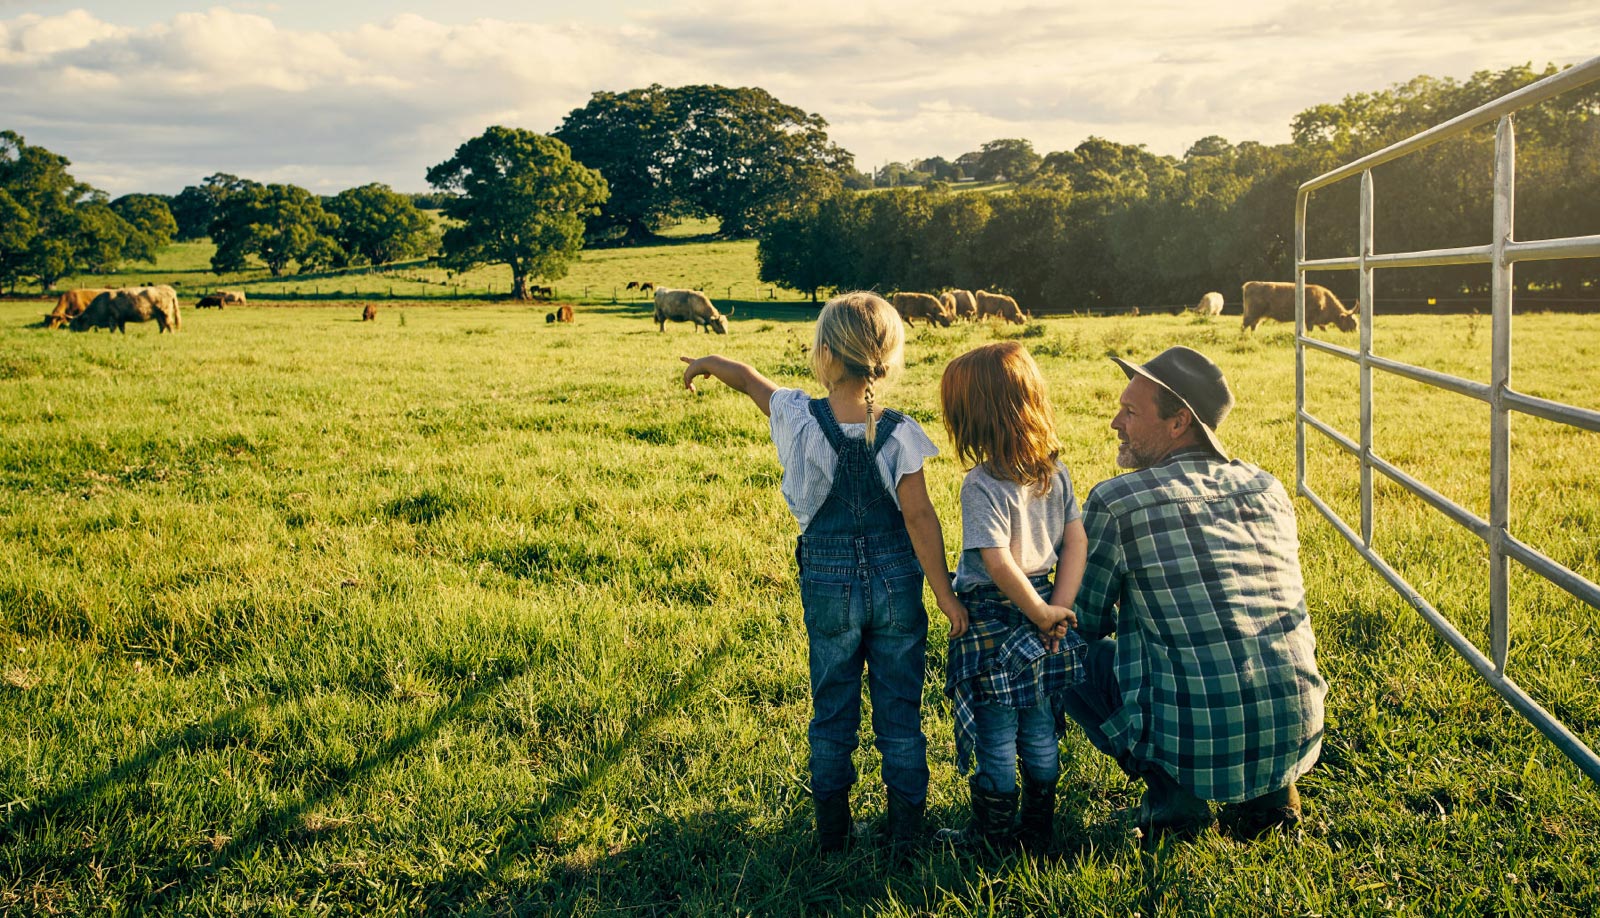 Family of a father and his two cute daughters staring out at a large farm with cows grazing